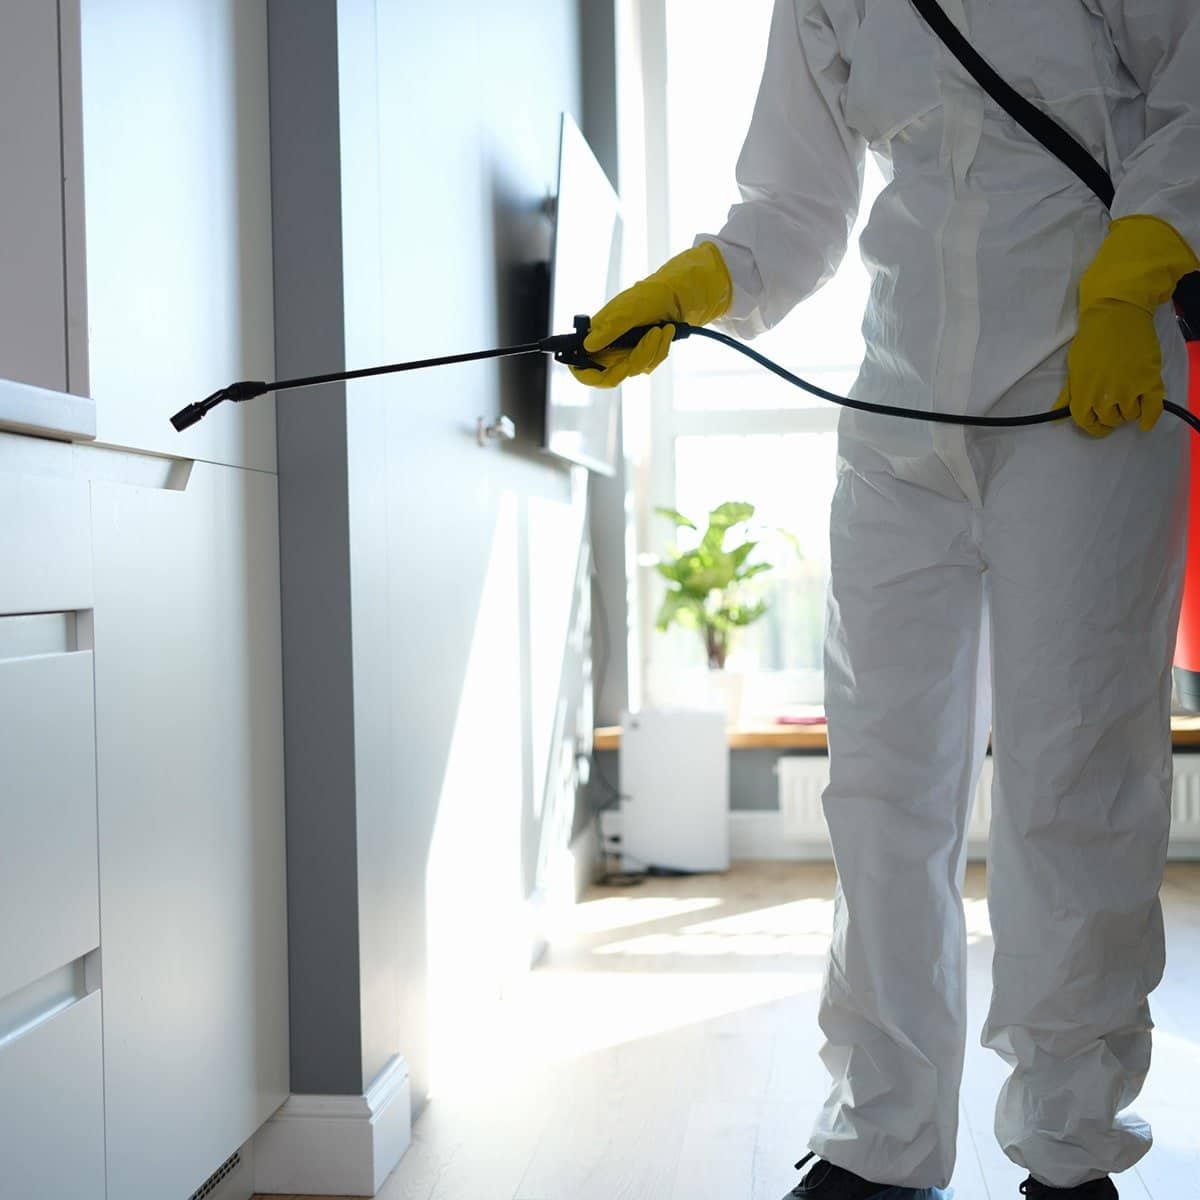 Exterminator using pest control products inside a room